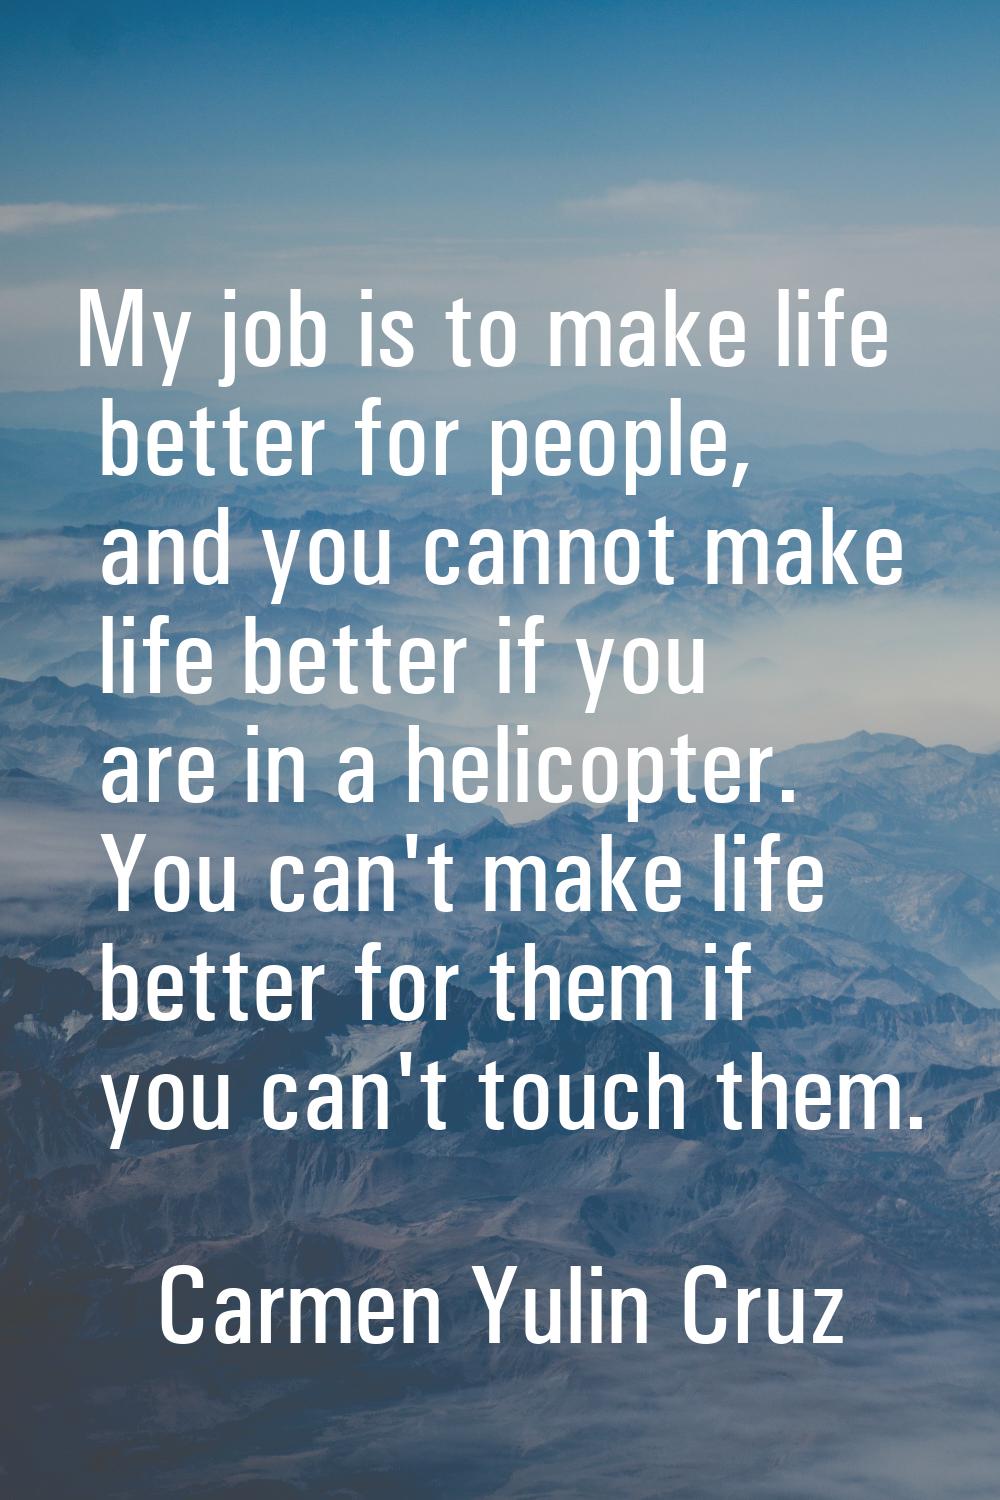 My job is to make life better for people, and you cannot make life better if you are in a helicopte